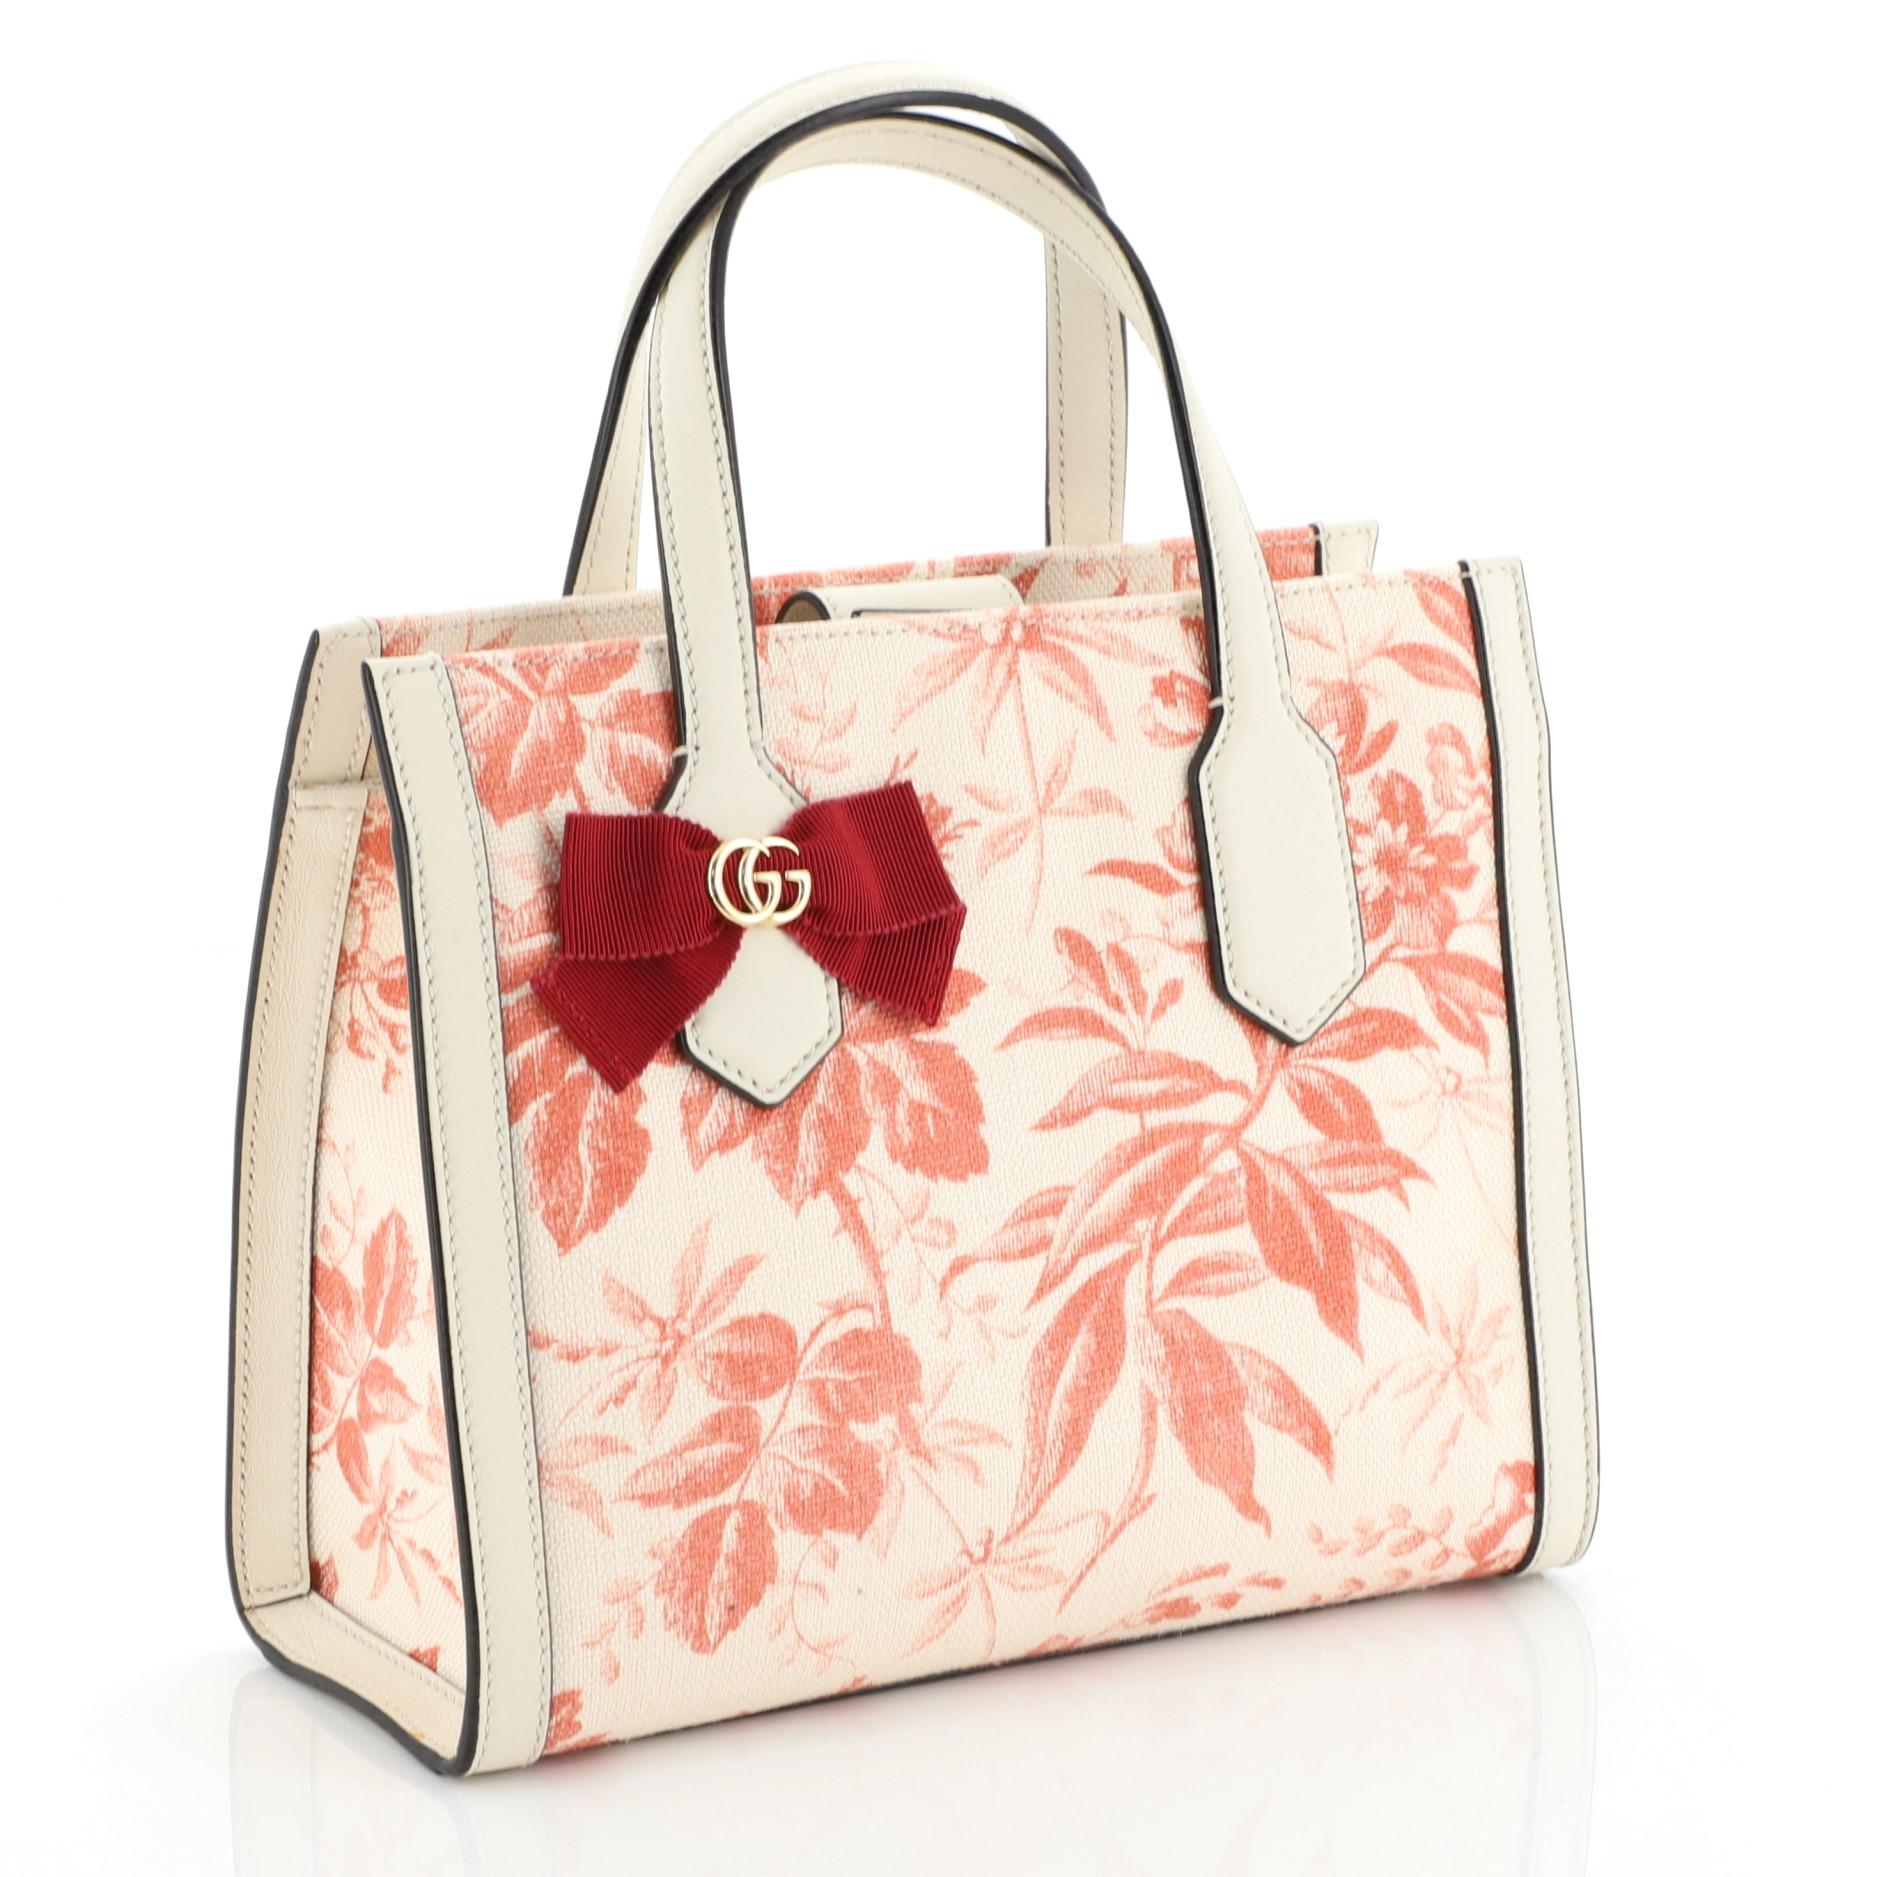 This Gucci GG Ribbon Tote Printed Linen Small, crafted from printed fabric, features dual flat leather handles, GG emblem and bow, and gold-tone hardware. Its magnetic closure opens to a white canvas interior with slip pockets. 

Estimated Retail